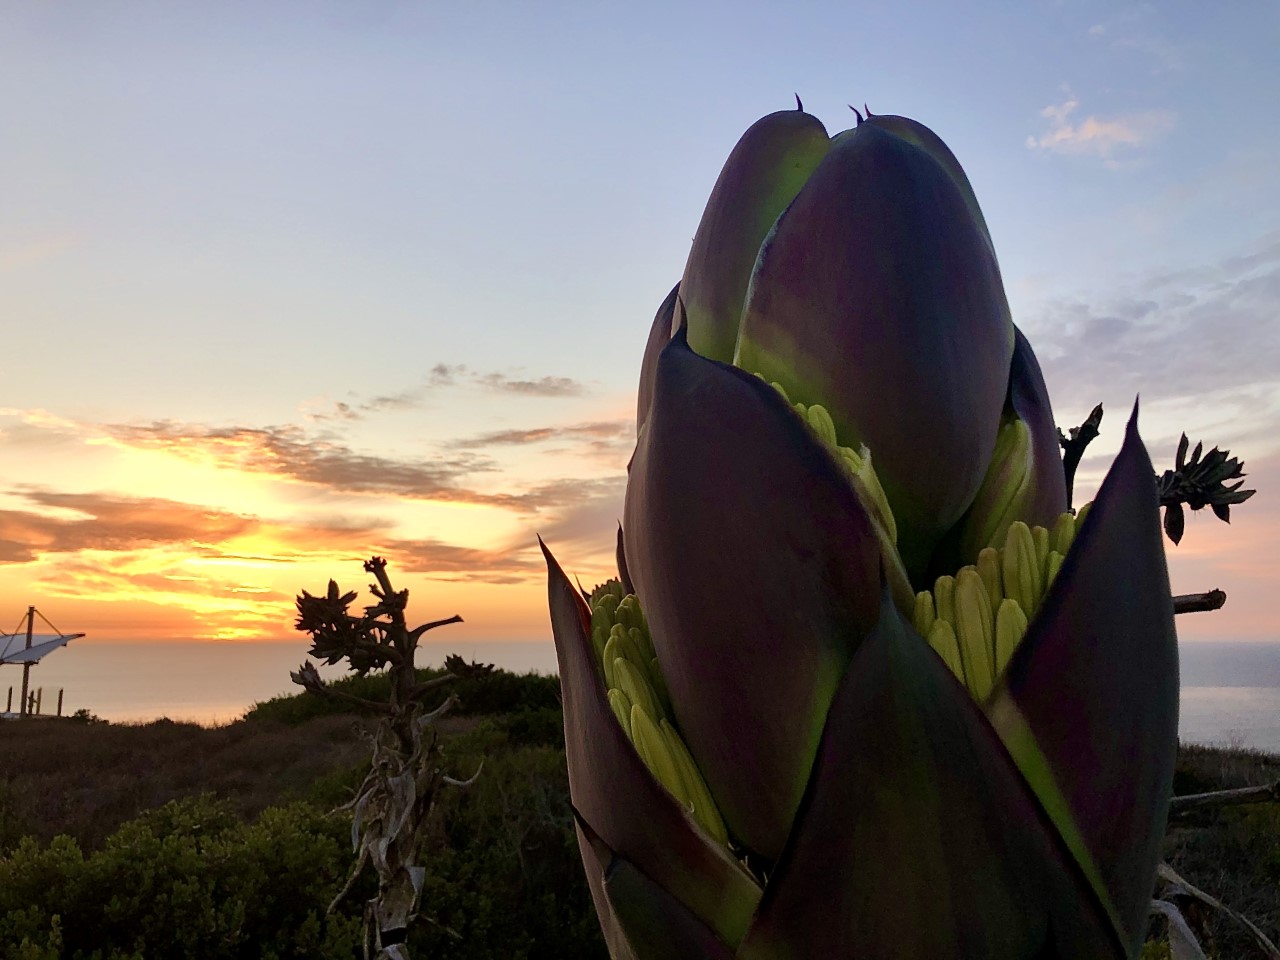 The yellow bloom of a Shaw’s Agave has begun to open as the sun sets in the background.